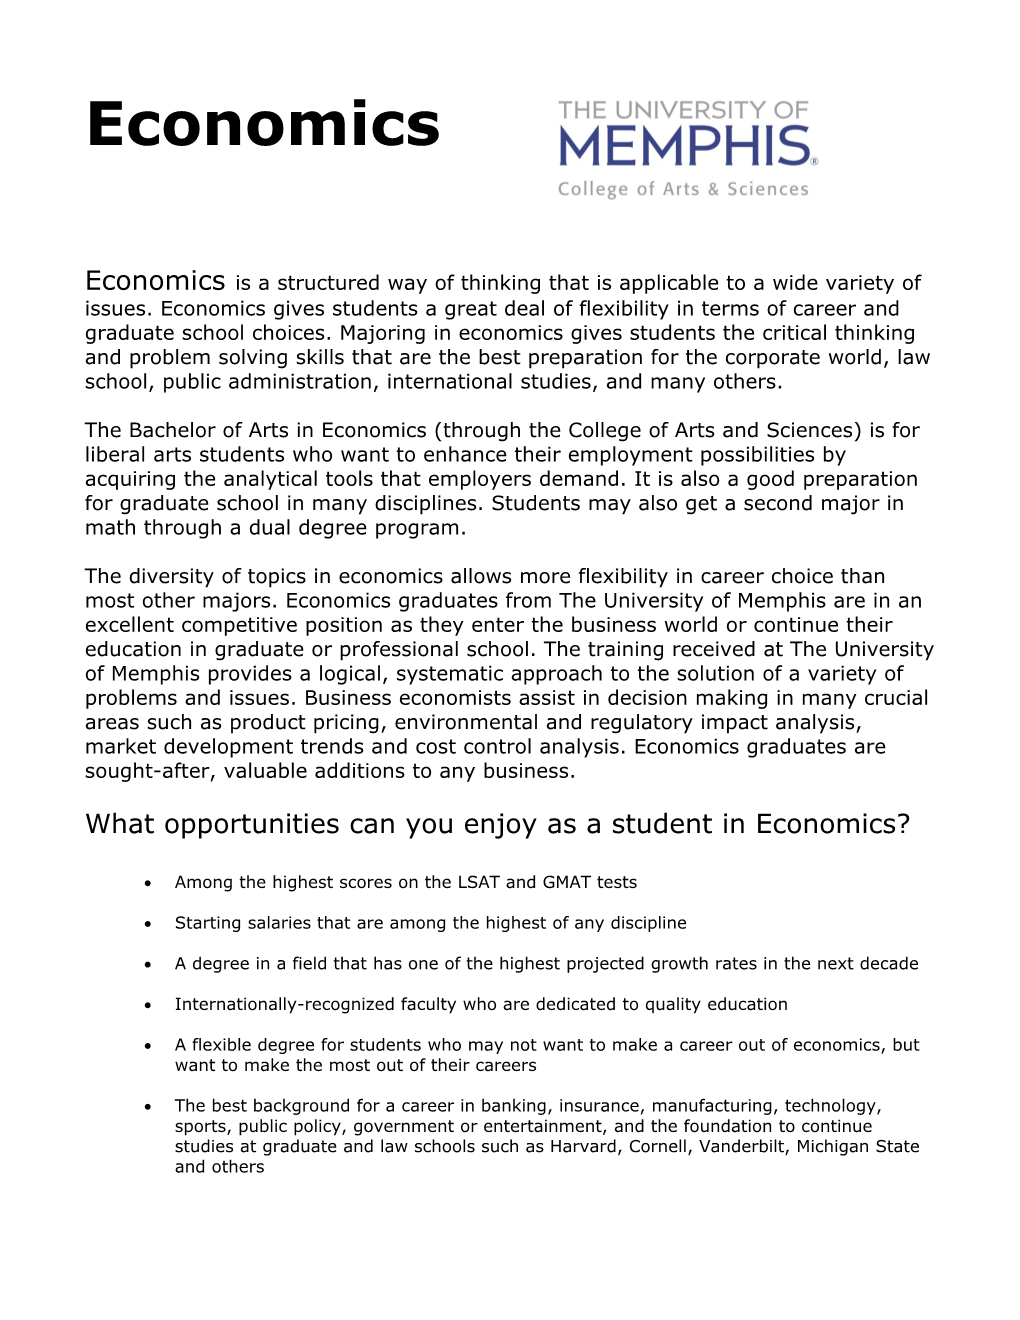 What Opportunities Can You Enjoy As a Student in Economics?